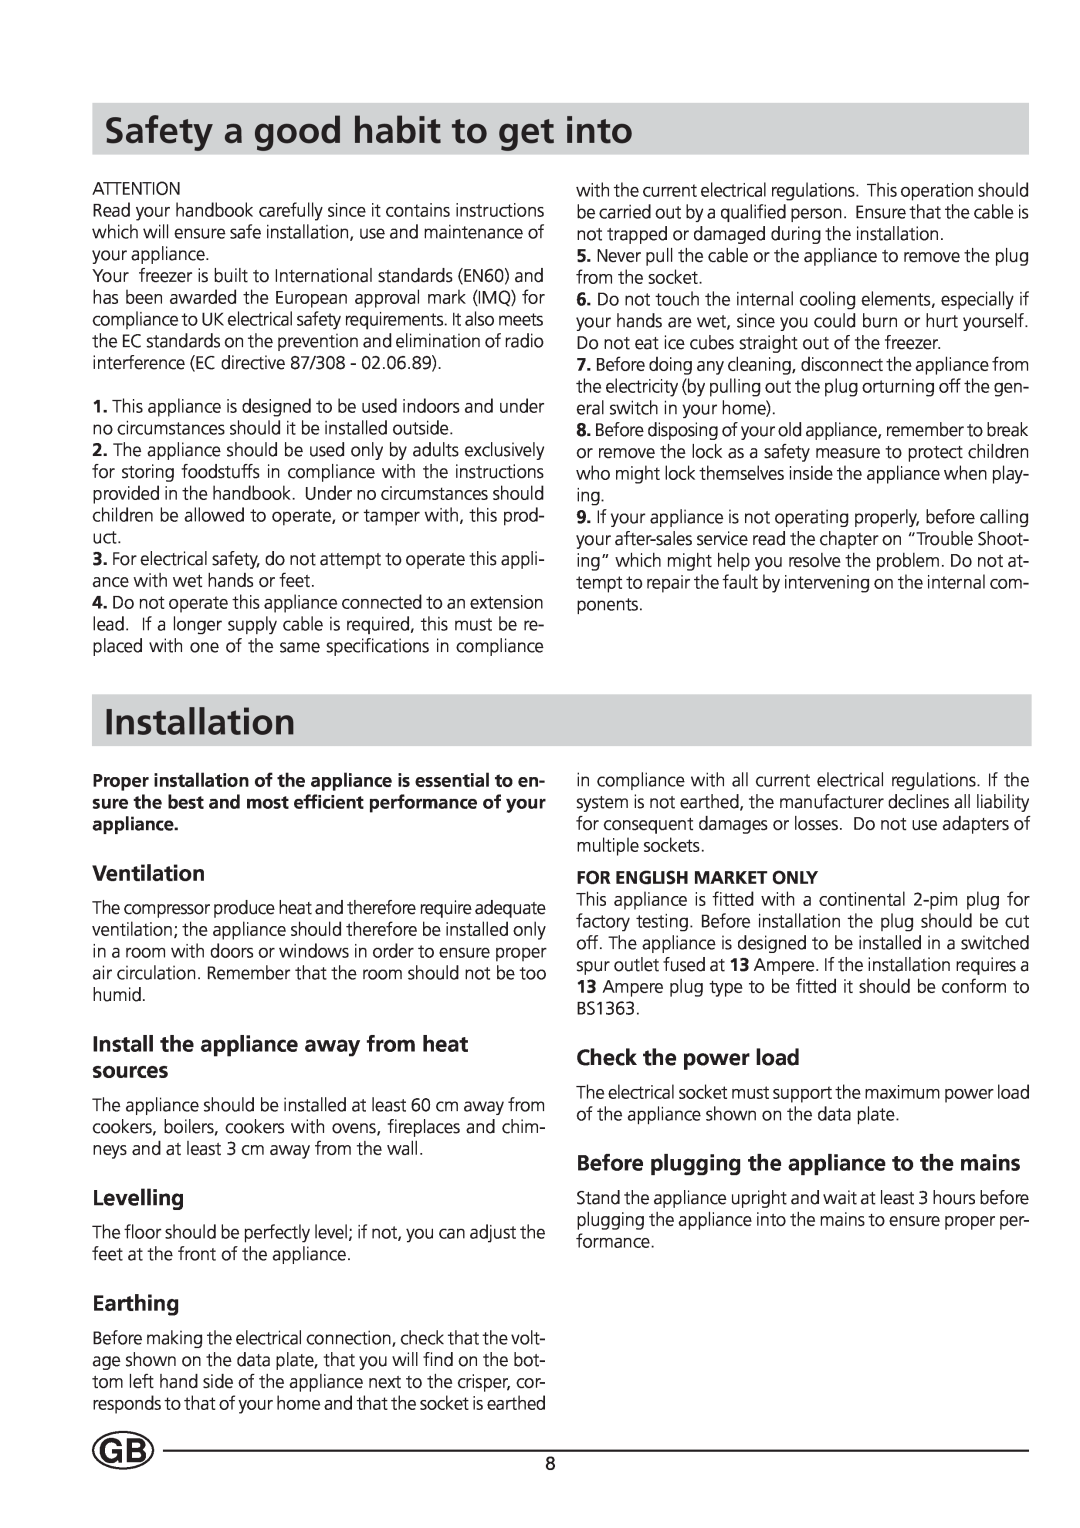 Smeg VR105B specifications Safety a good habit to get into, Installation, Ventilation, Levelling, Earthing 